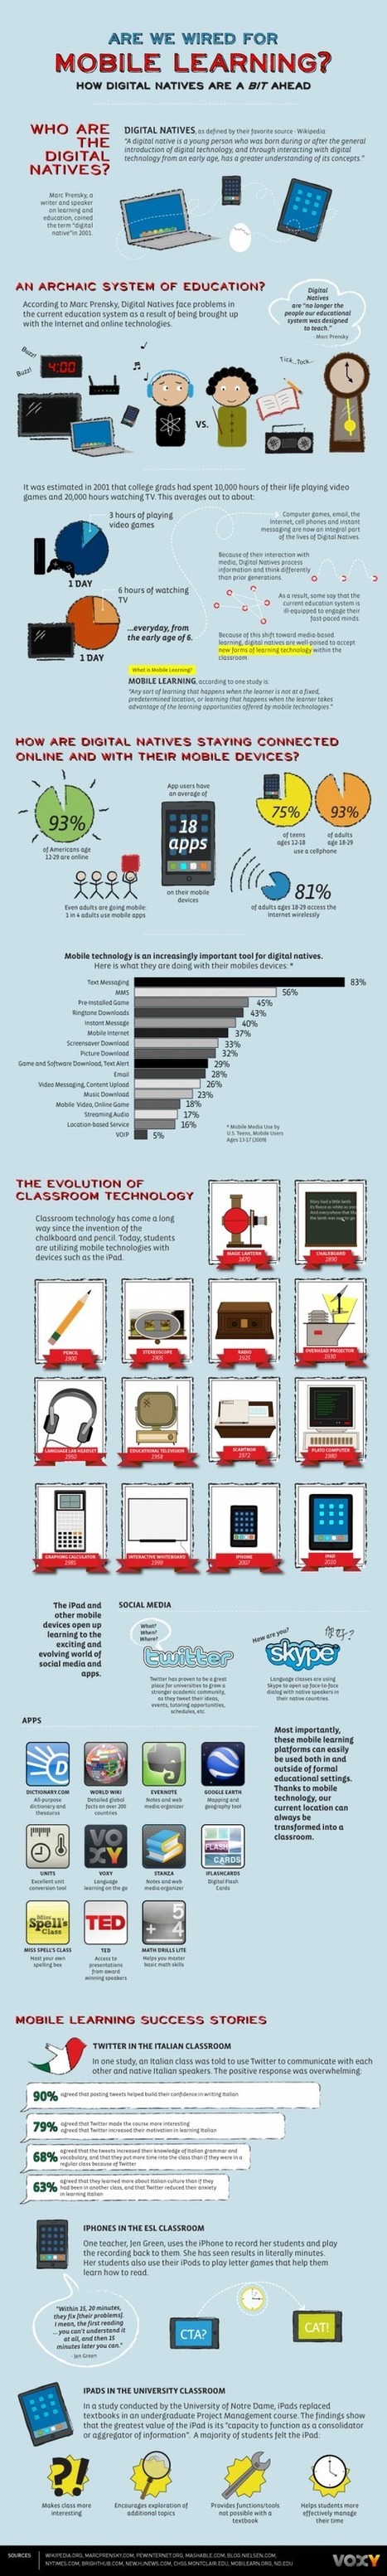 Is Mobile Learning in our DNA? [INFOGRAPHIC] | LearnDash | Create, Innovate & Evaluate in Higher Education | Scoop.it